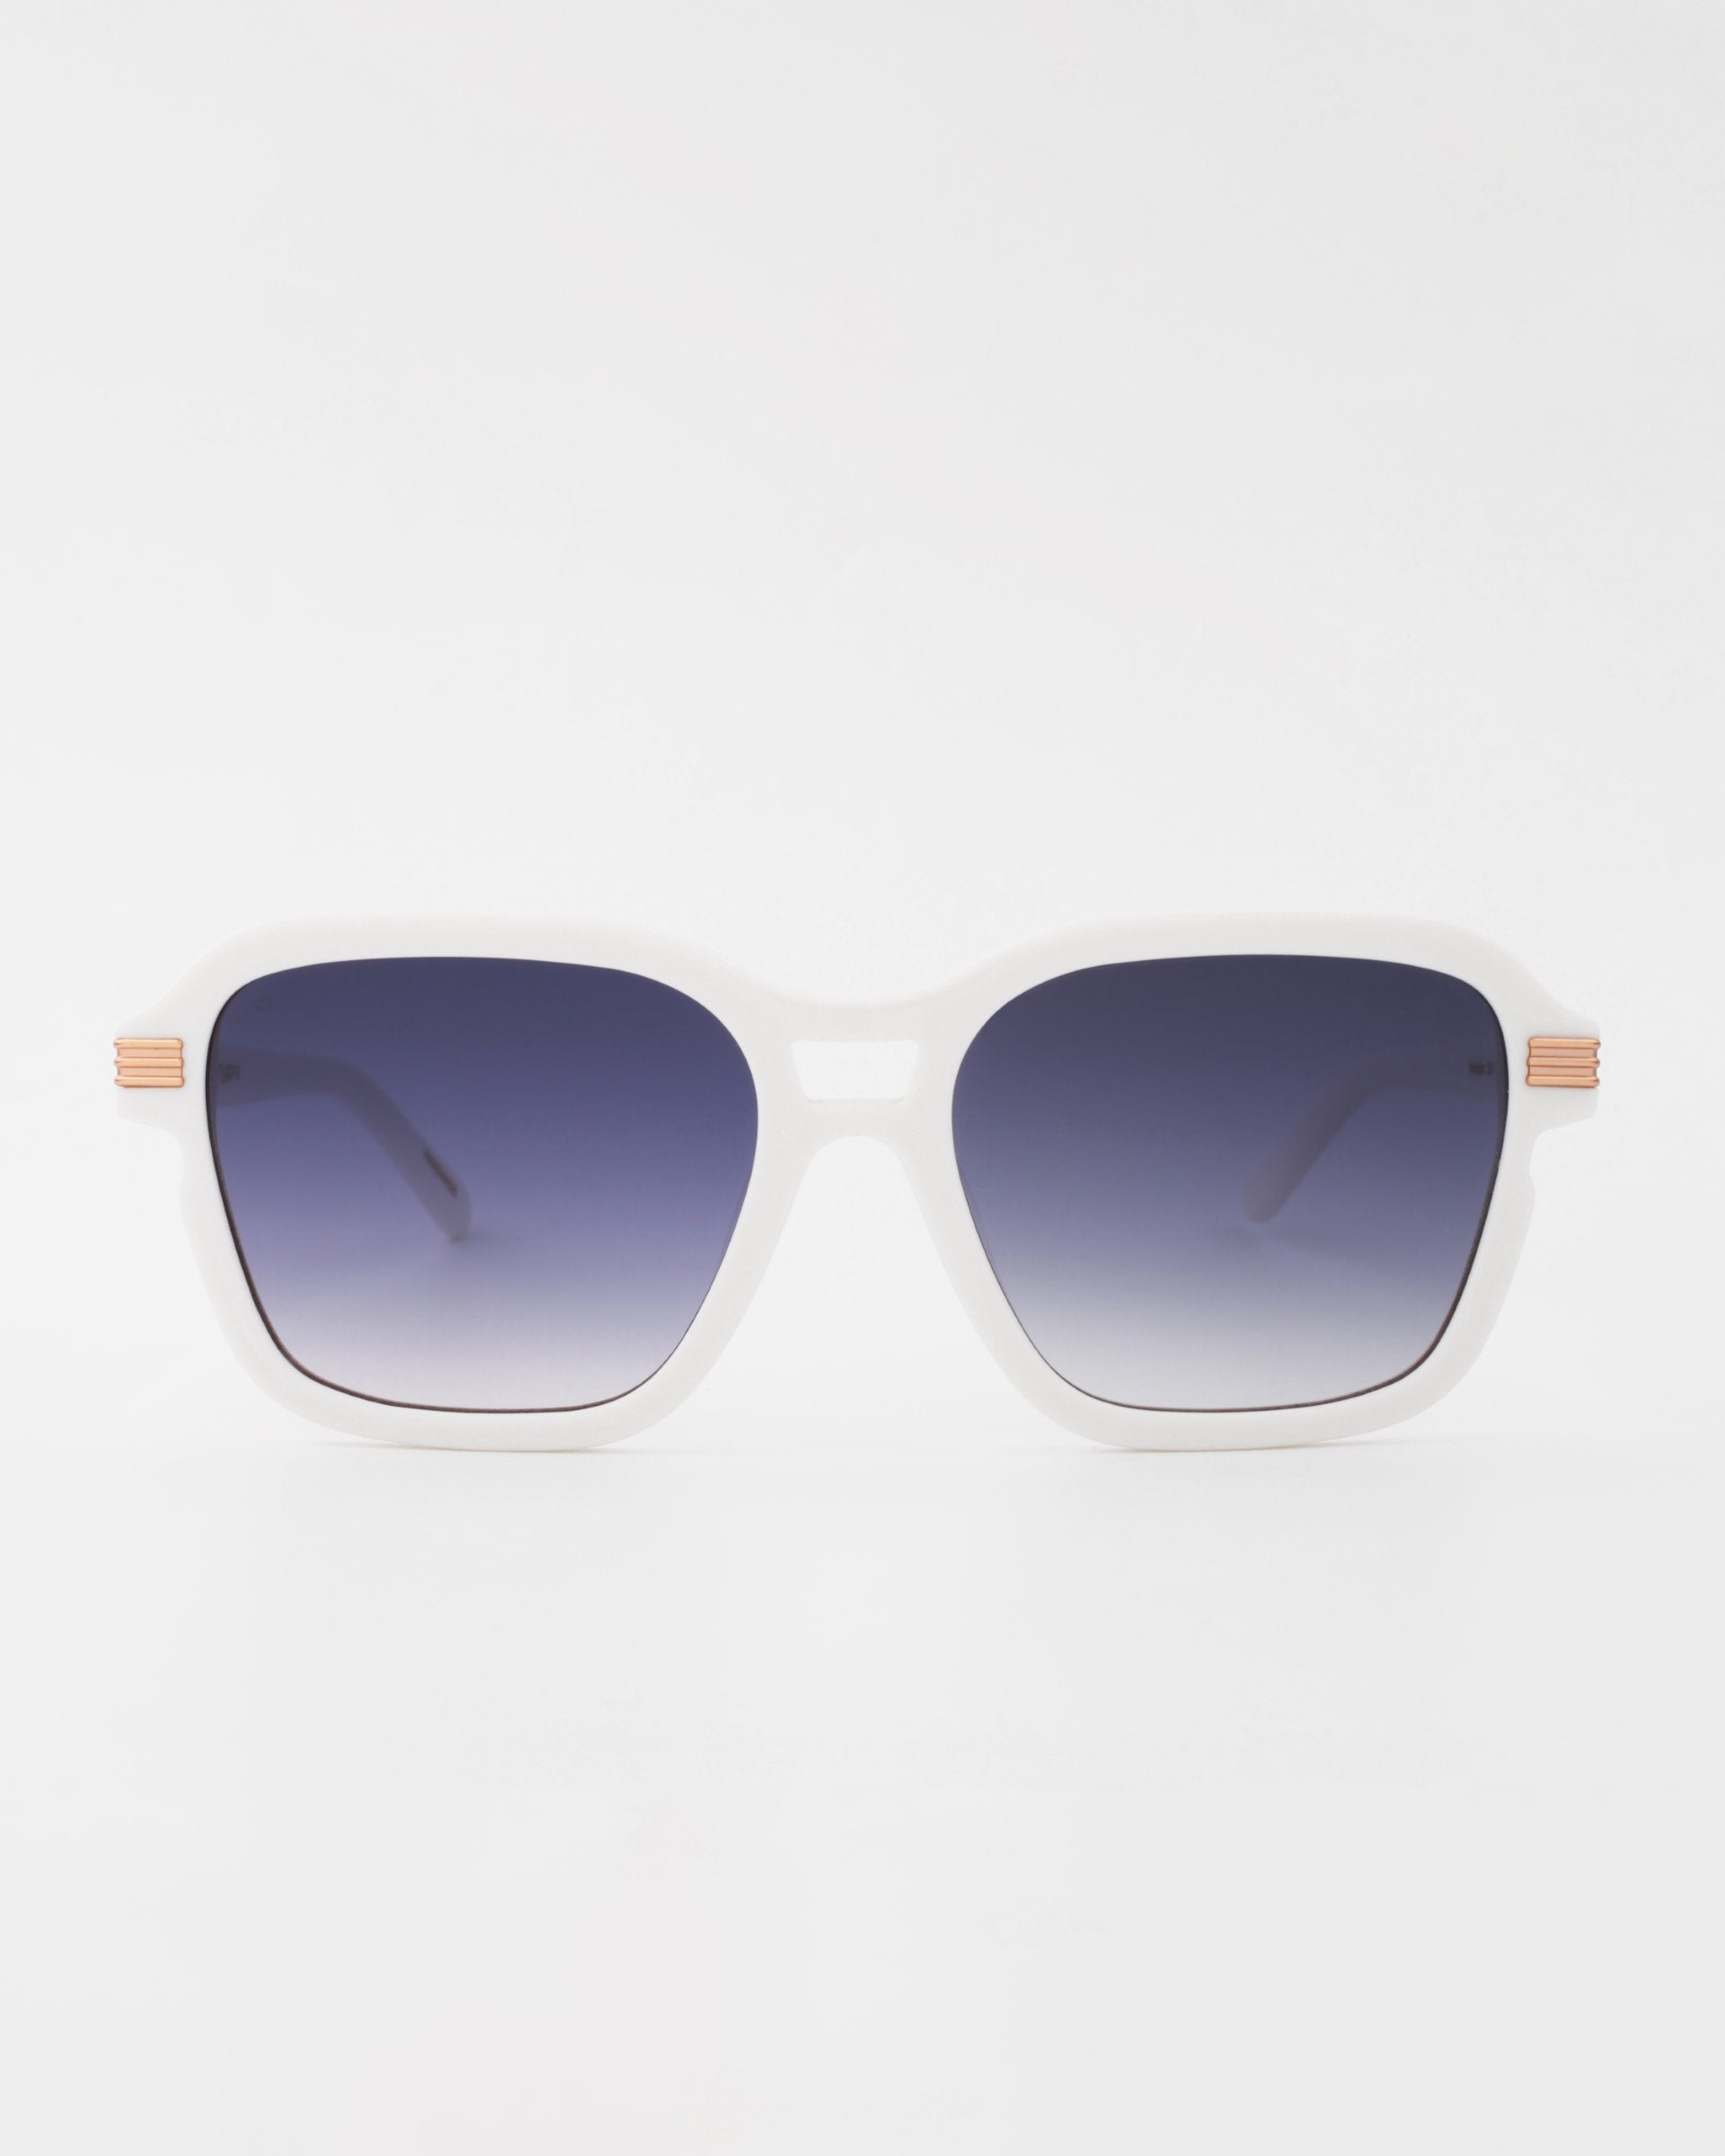 A pair of For Art&#39;s Sake® Shadyside sunglasses with shatter-resistant nylon lenses and gold-plated temple details, displayed against a plain white background.